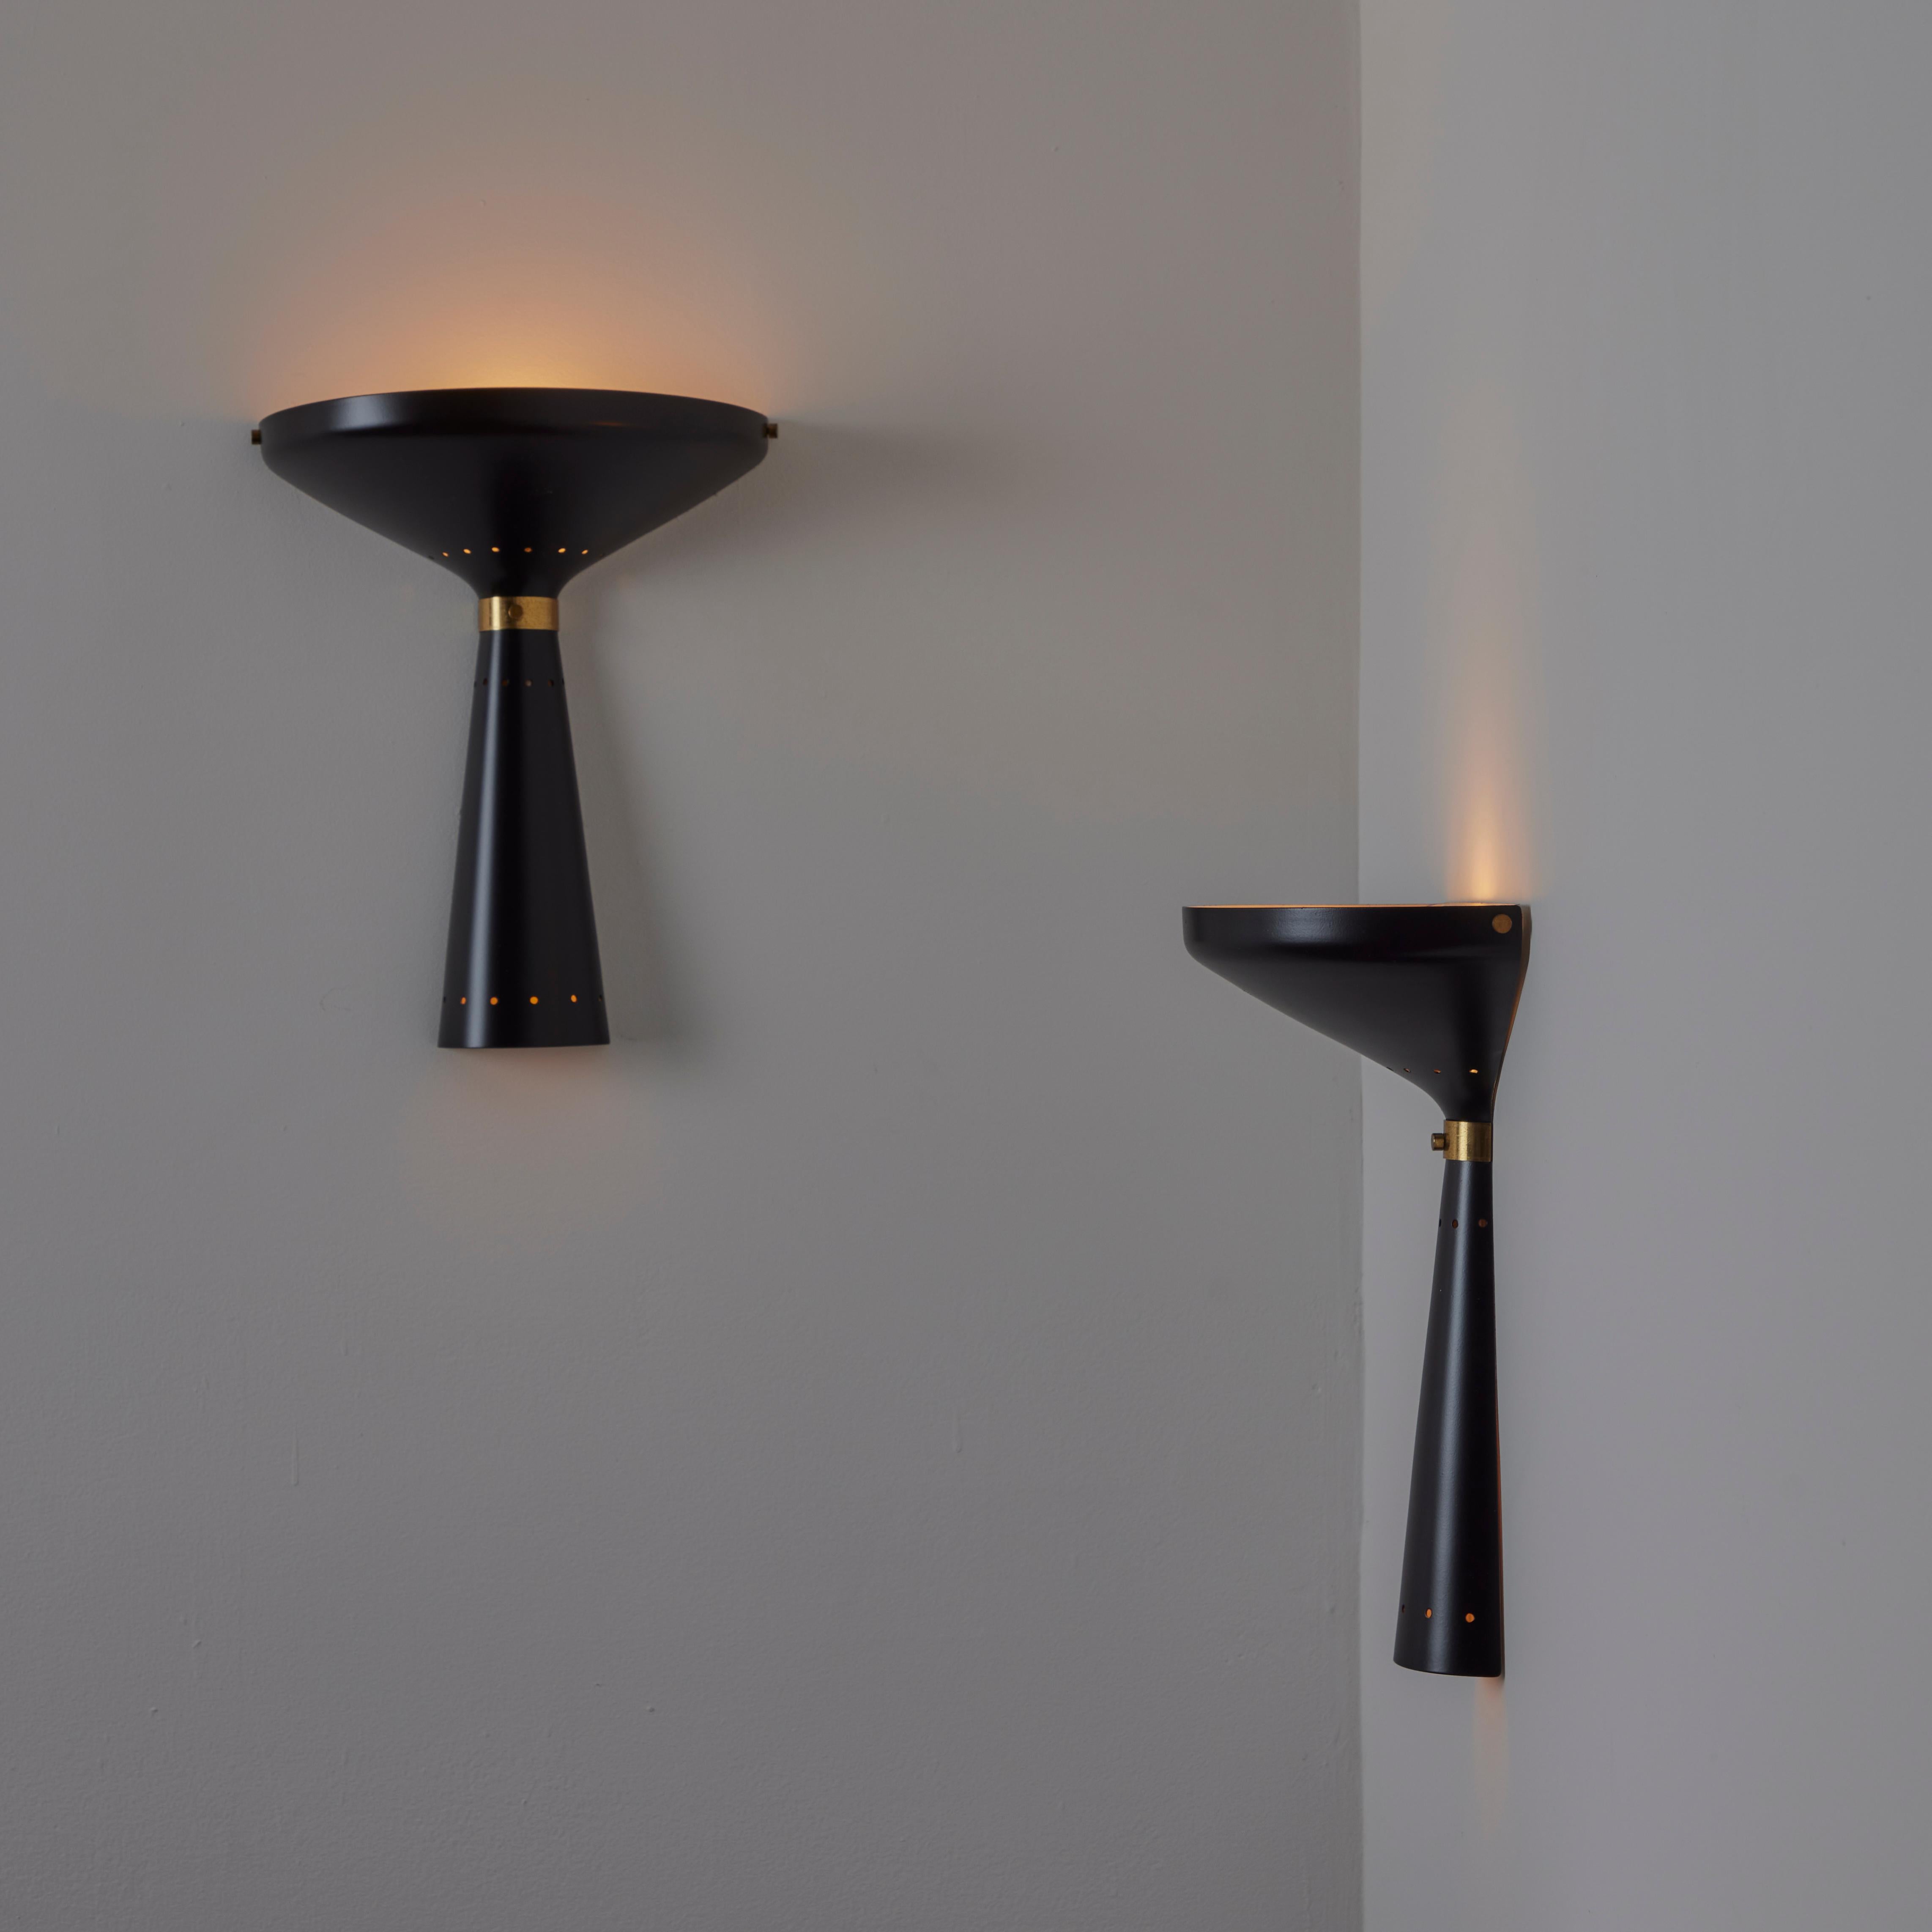 Pair of Stilnovo sconces. Designed in Italy, circa the 1960s. All black enameled bow-tie wall lamps featuring a brass collar. Perforation on the upper half allows for a nice detail. Holds a single E27 socket type, adapted for the US. We recommend a